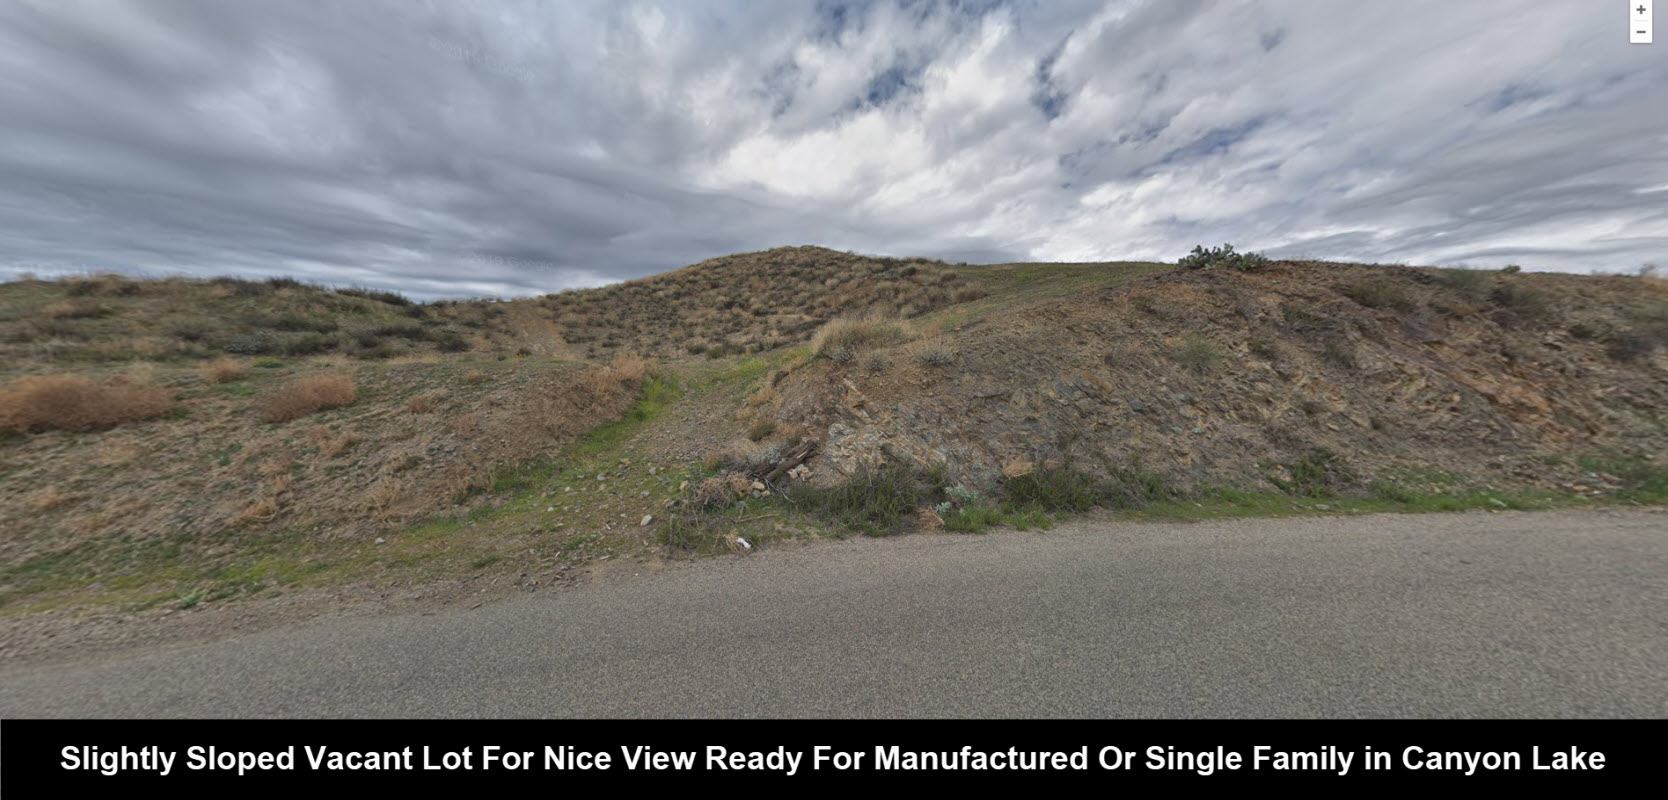 Menifee Vacant Lot Home Slightly Sloped Just Enough to Have a Nice View